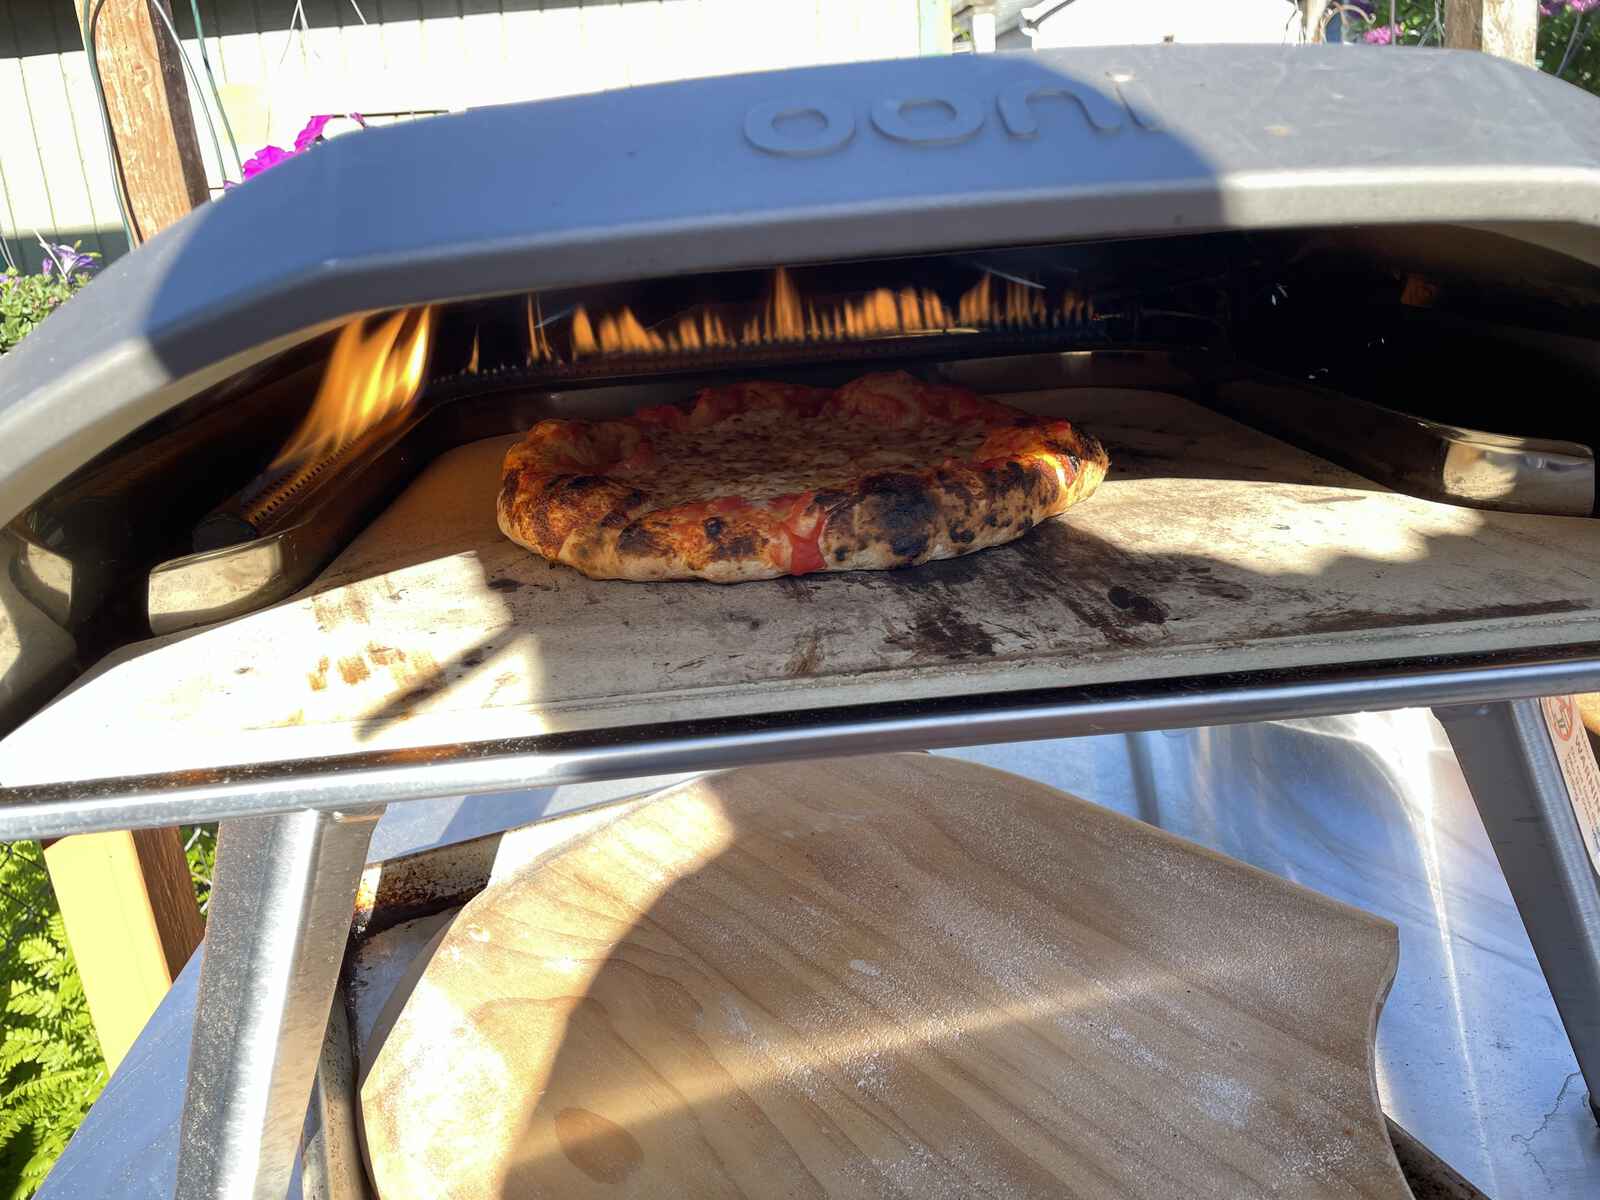 Pizza in an oven